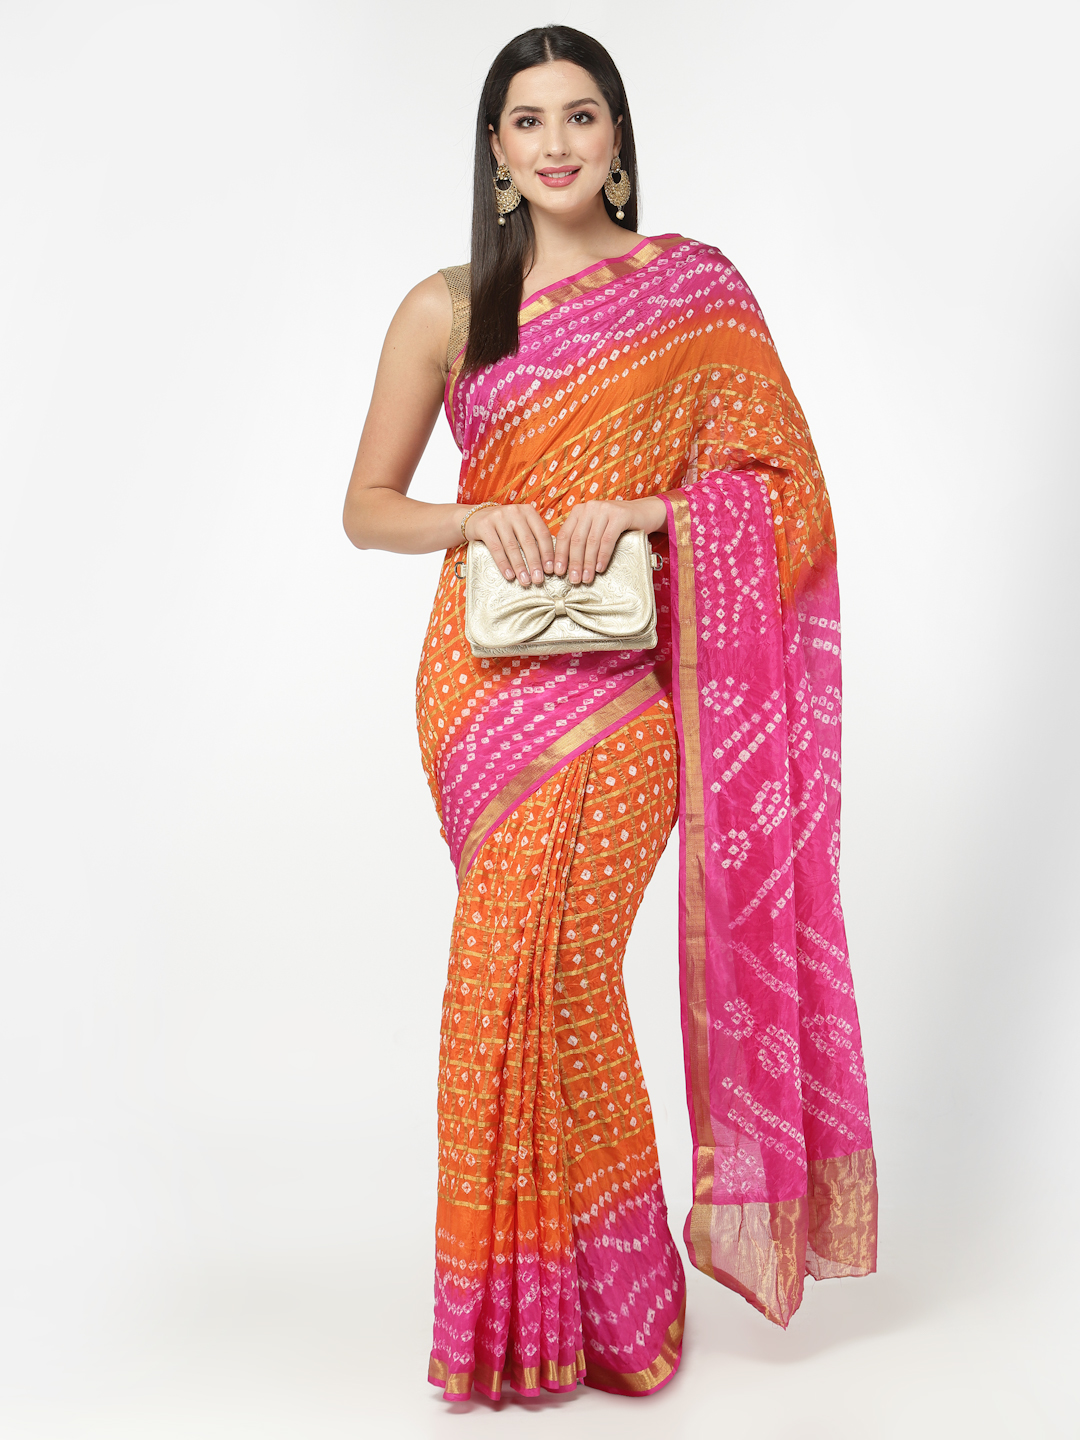 Women Silk Bandhani and Zari Weaving Saree with Unstitched Blouse - Orange And Pink